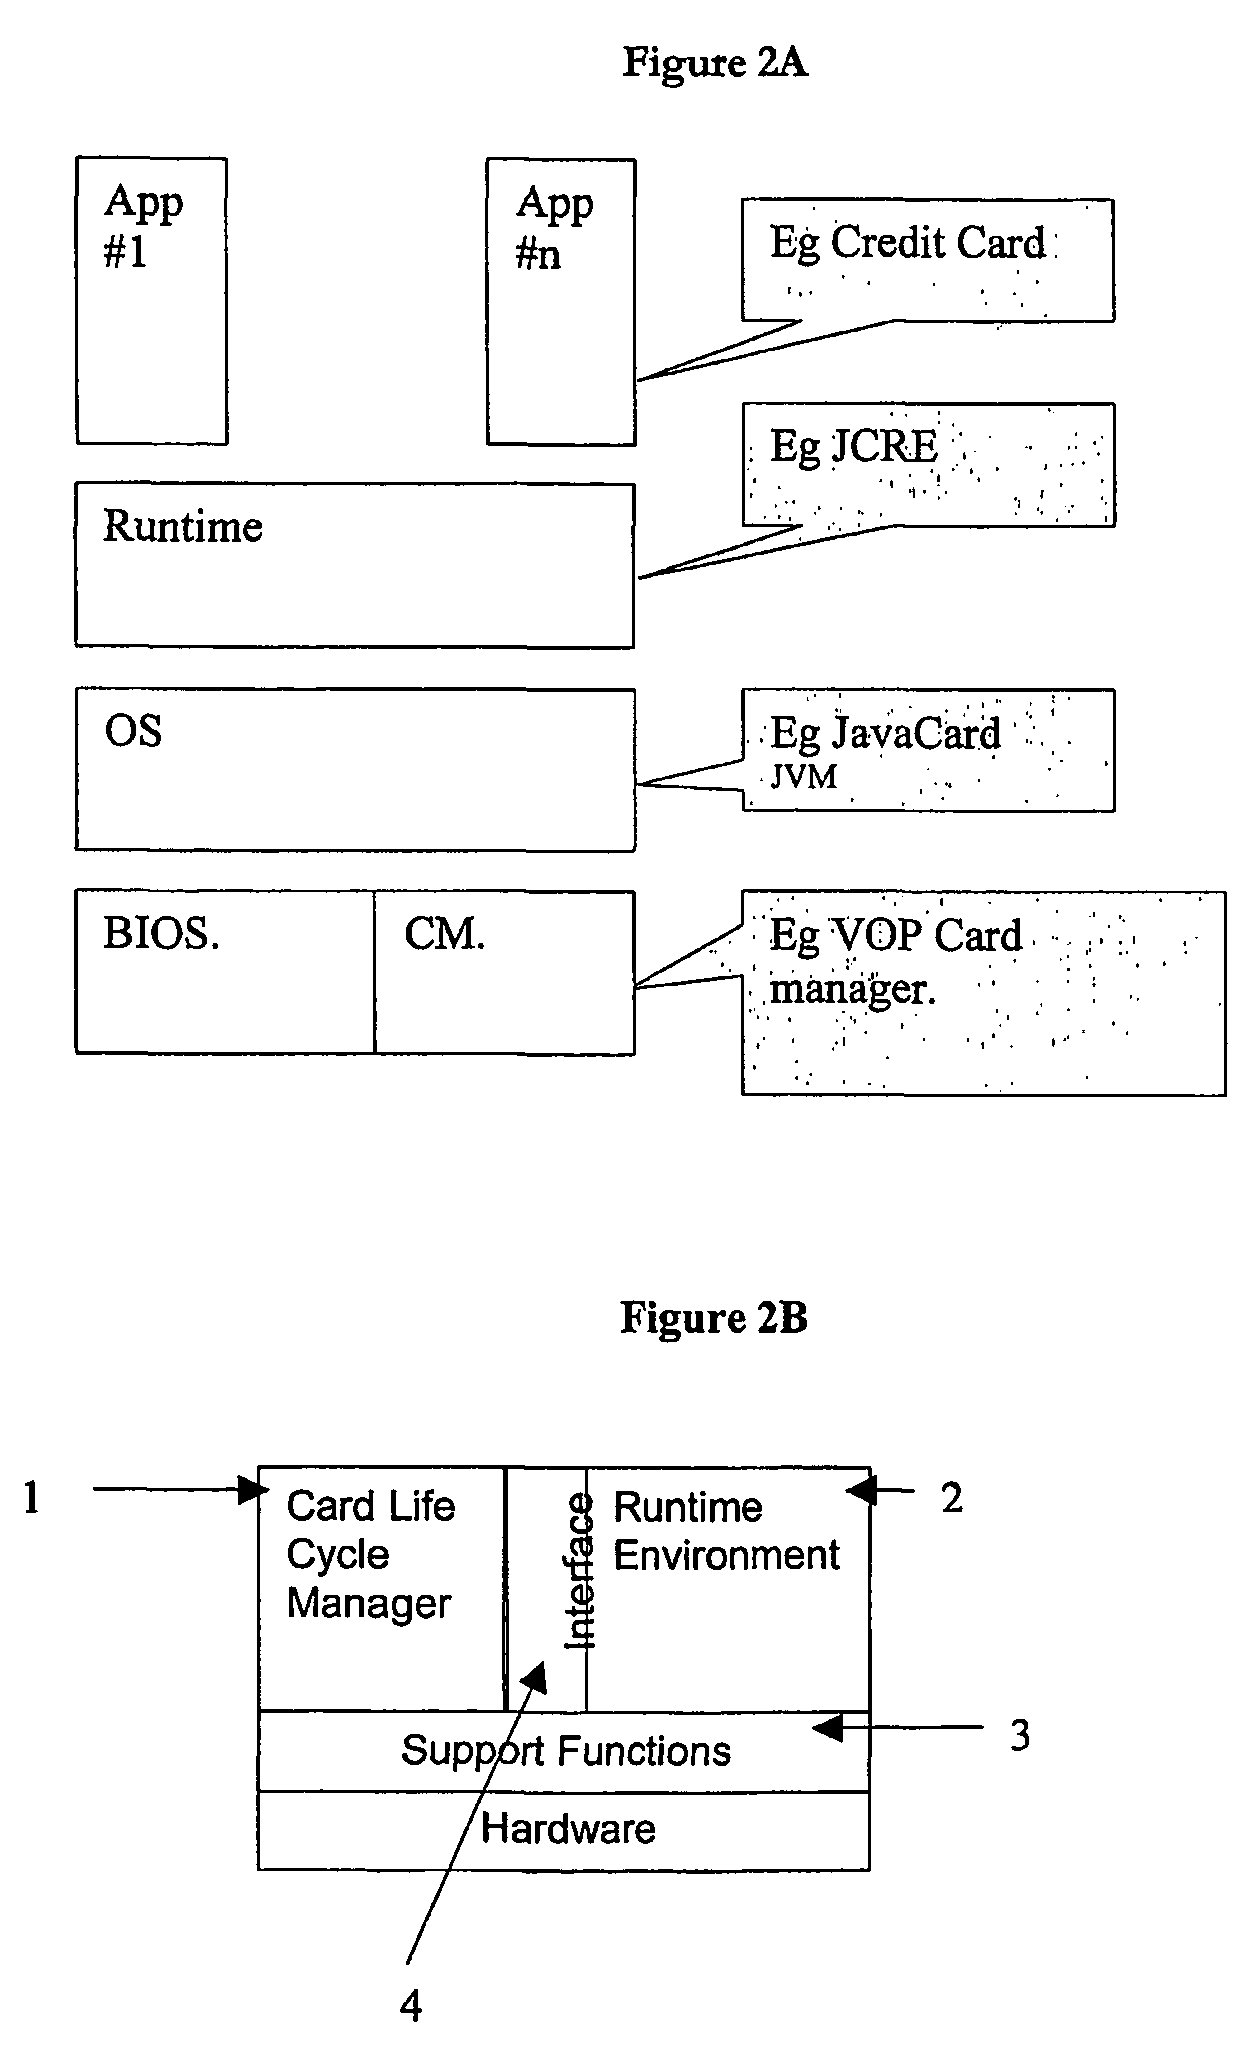 Computing device with an embedded microprocessor or micro-controller